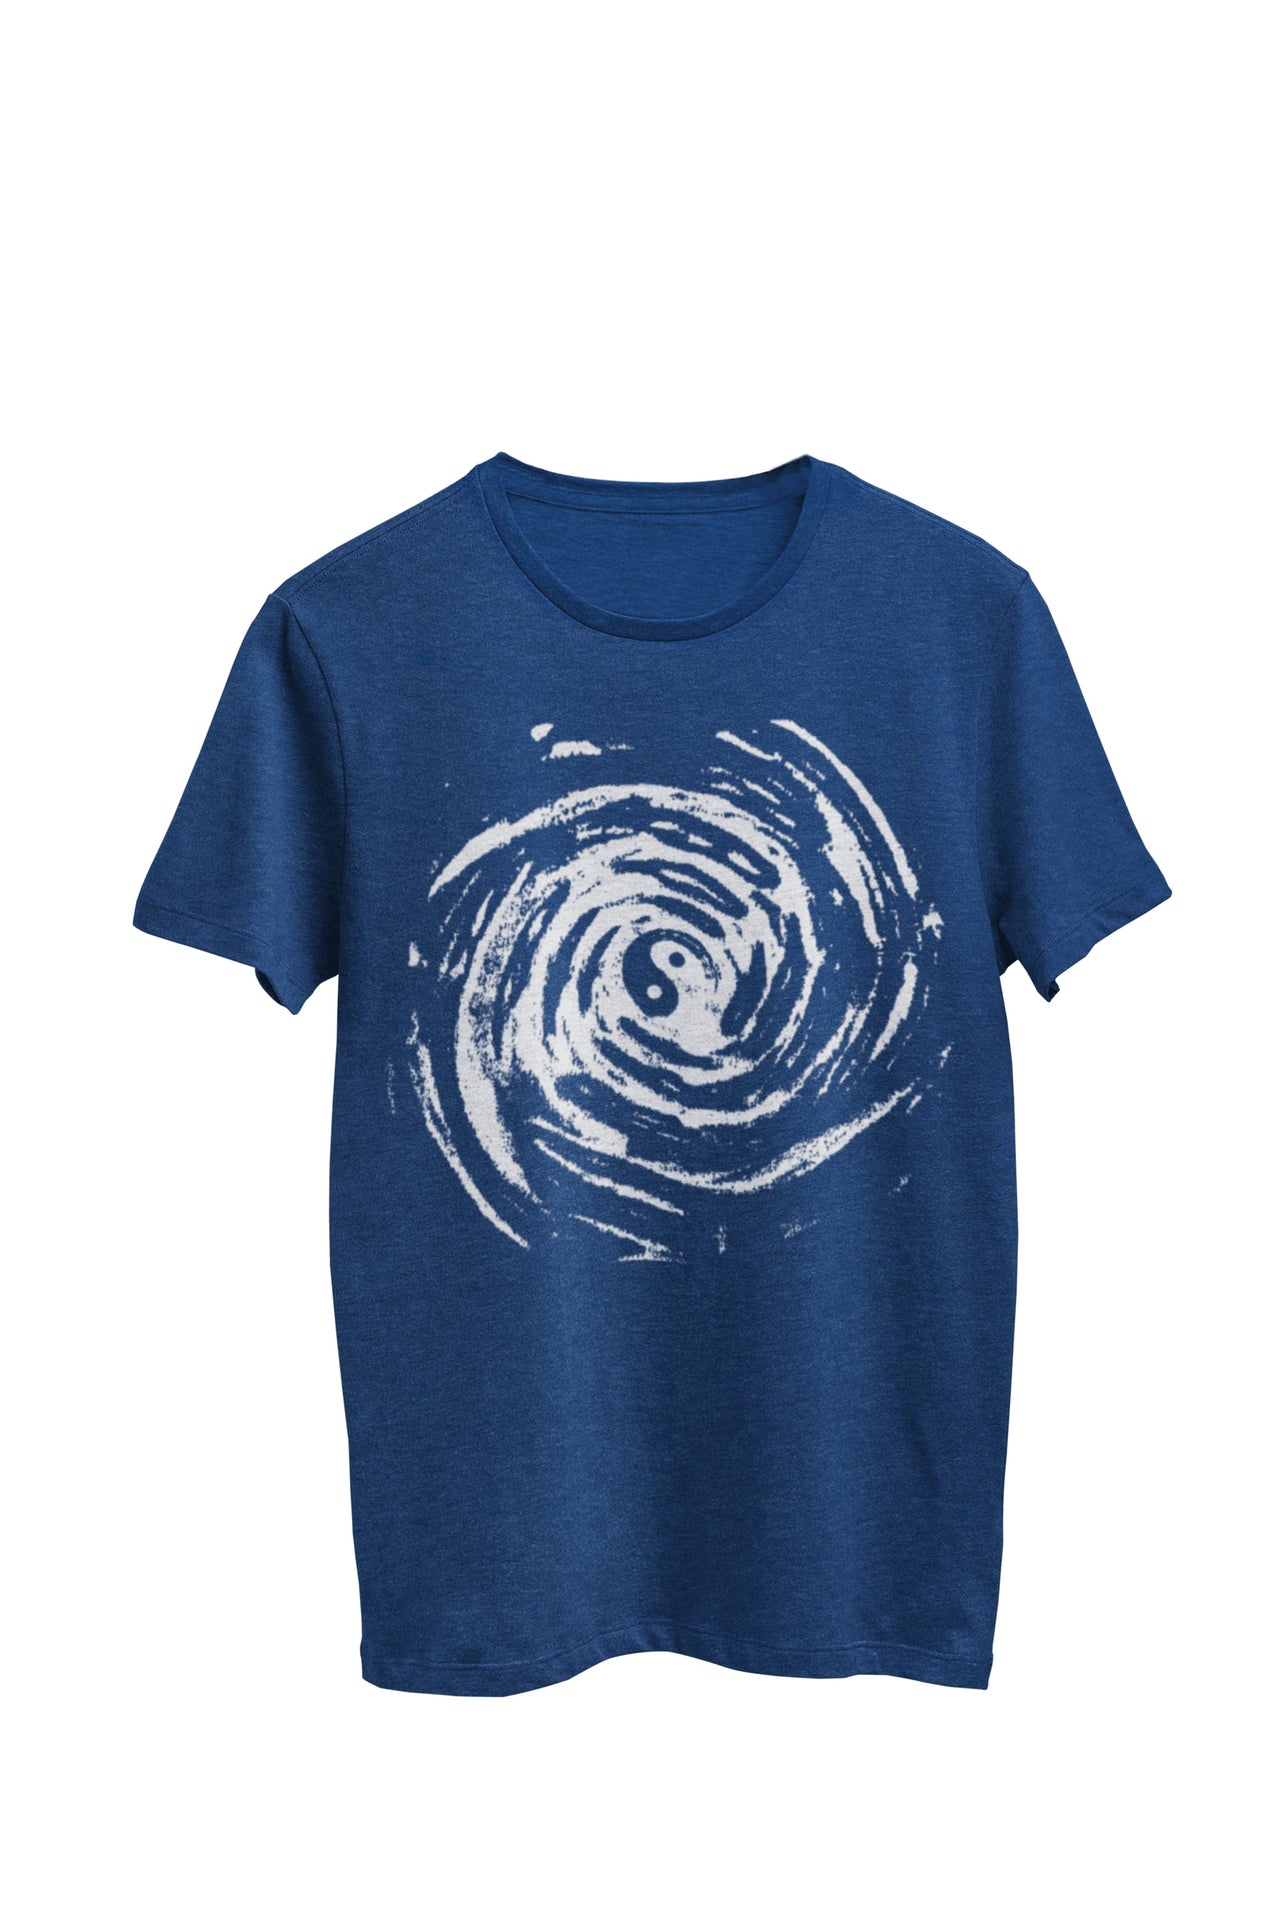 Navy heather unisex t-shirt featuring a white Yin Yang design. Designed by WooHoo Apparel